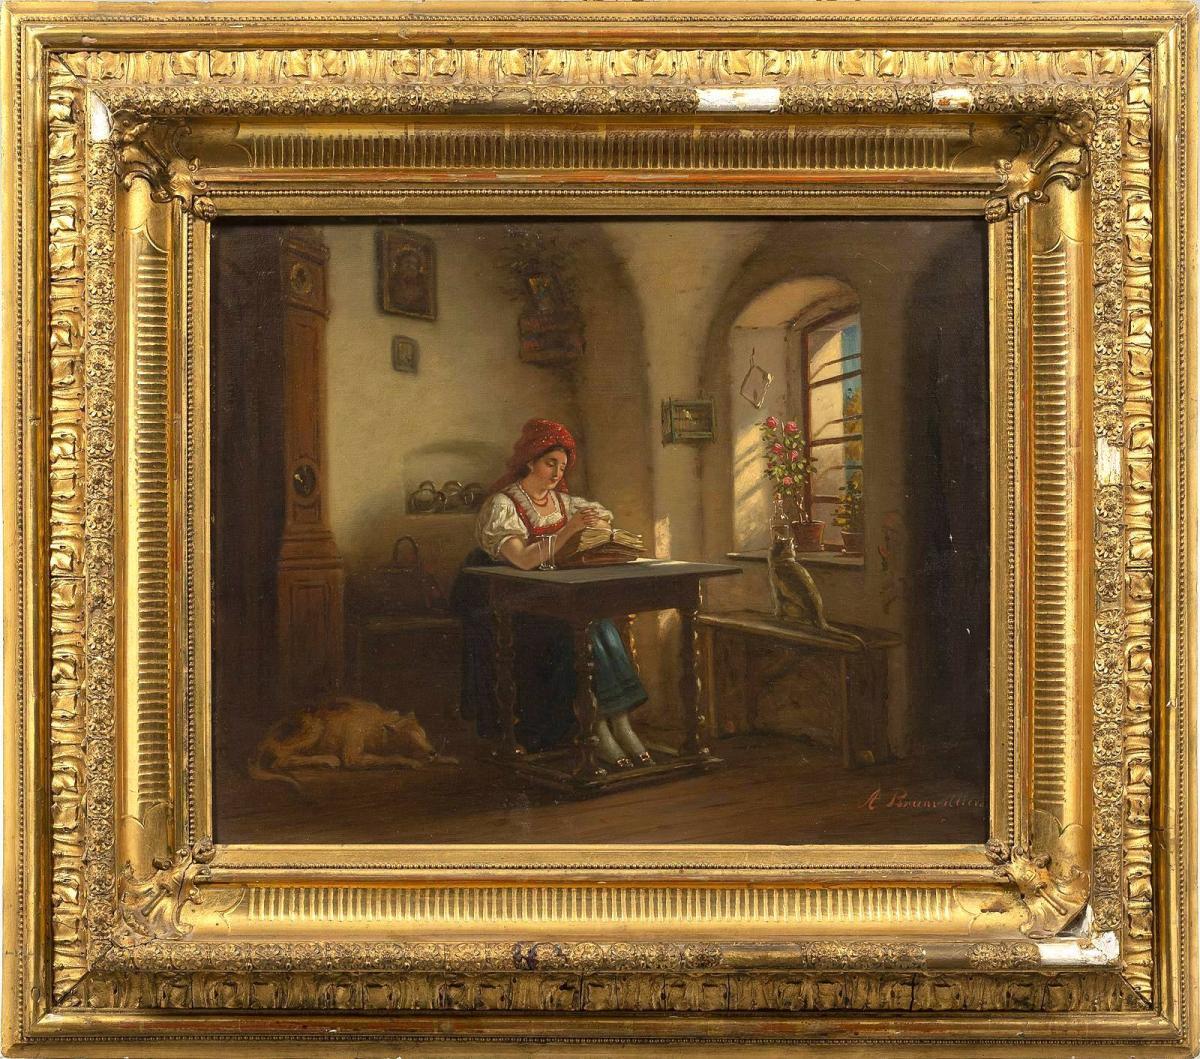 Interesting old painting representing an interior scene animated by a young woman sitting and reading a book. The room is radiated by a warm and grazing light that defines the volume of objects. This is an oil on canvas from the mid-19th century